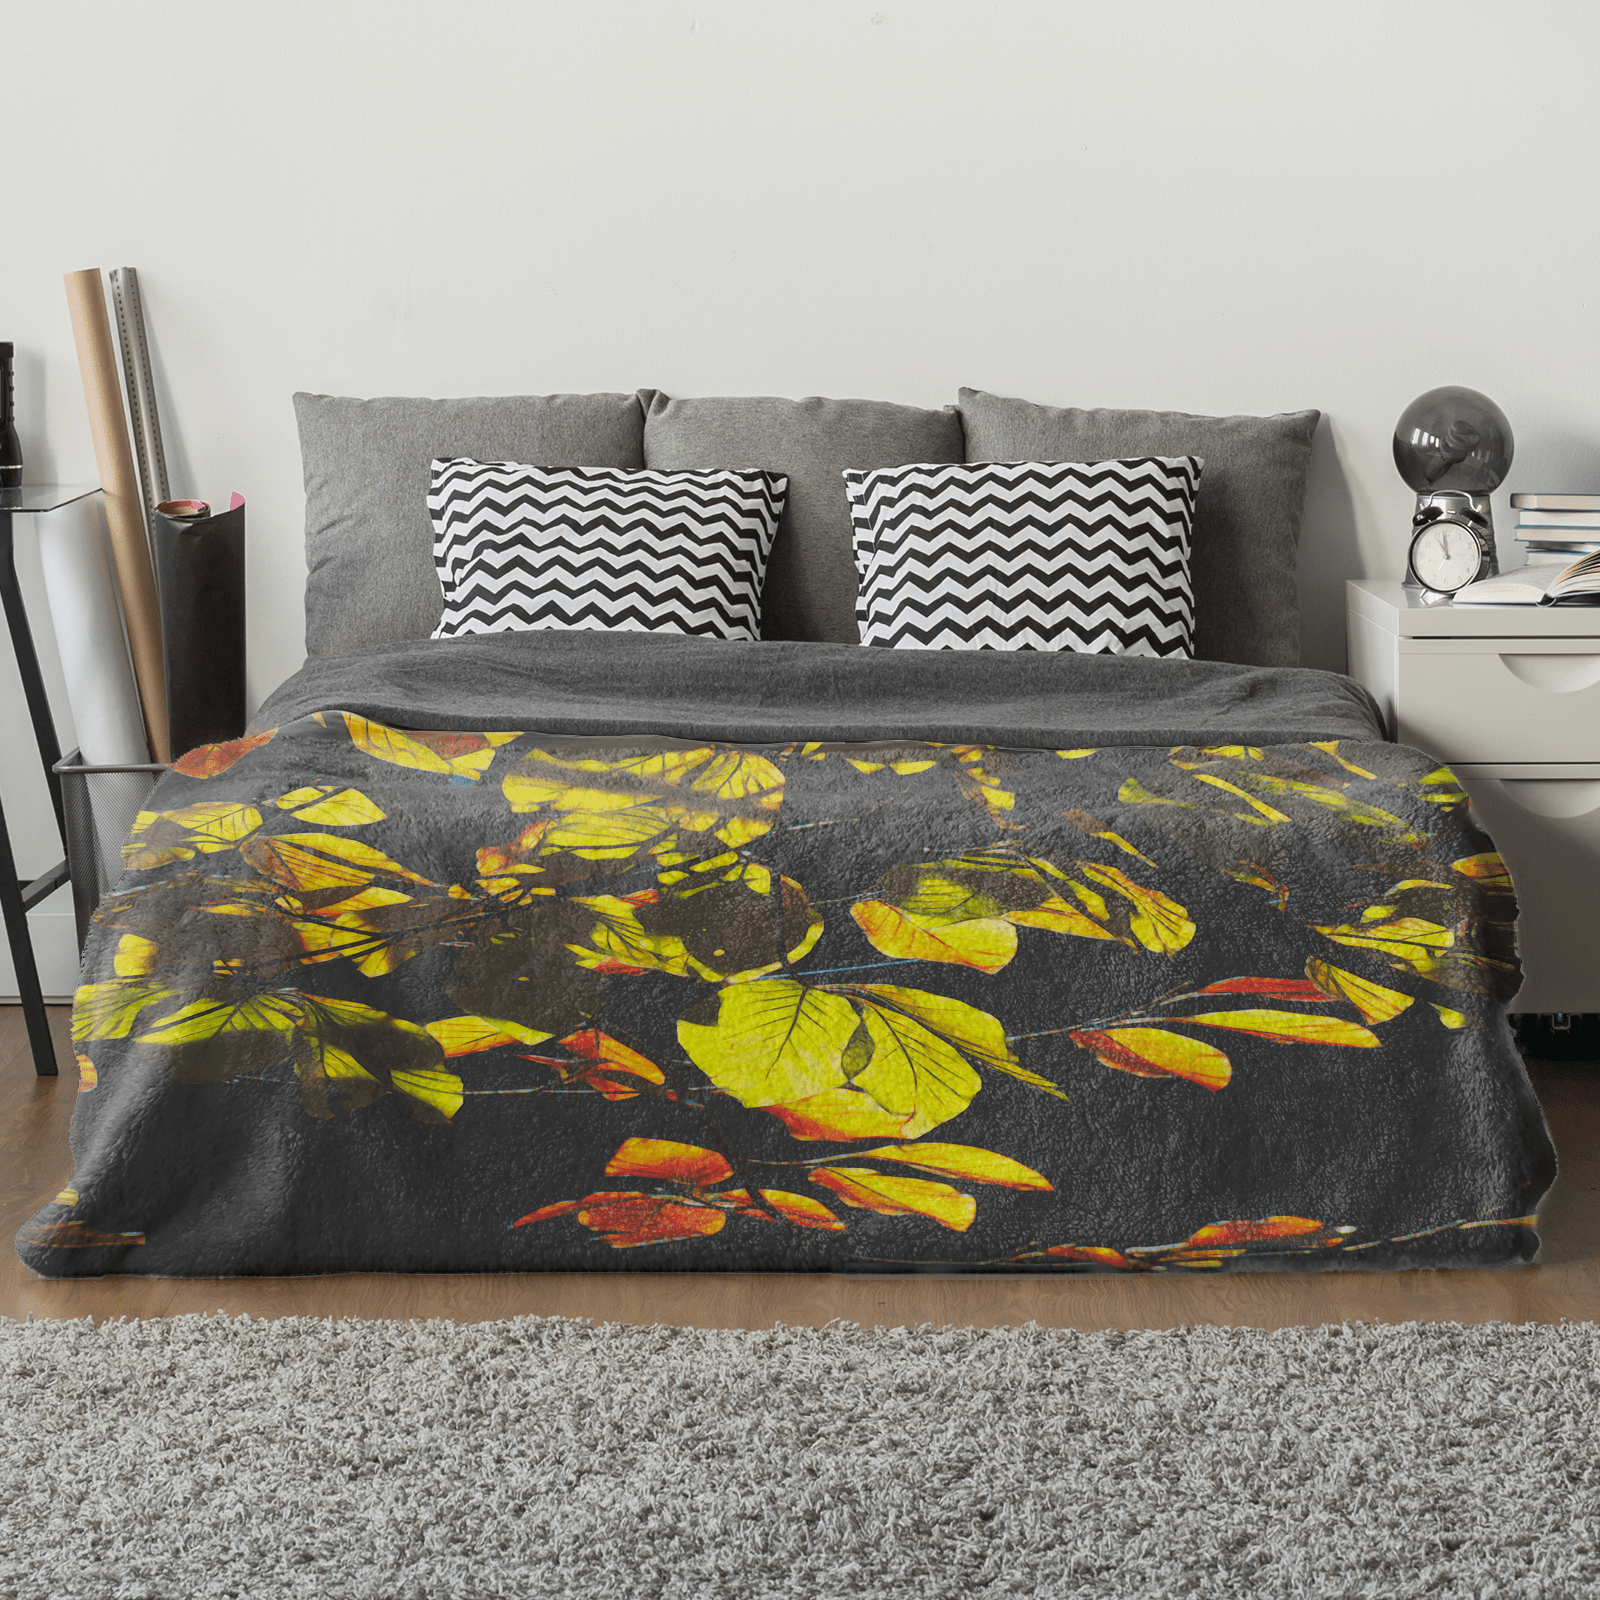 Yellow and red autumn leafs,Blanket Premium  200 x 150 cm / 60" x 80"